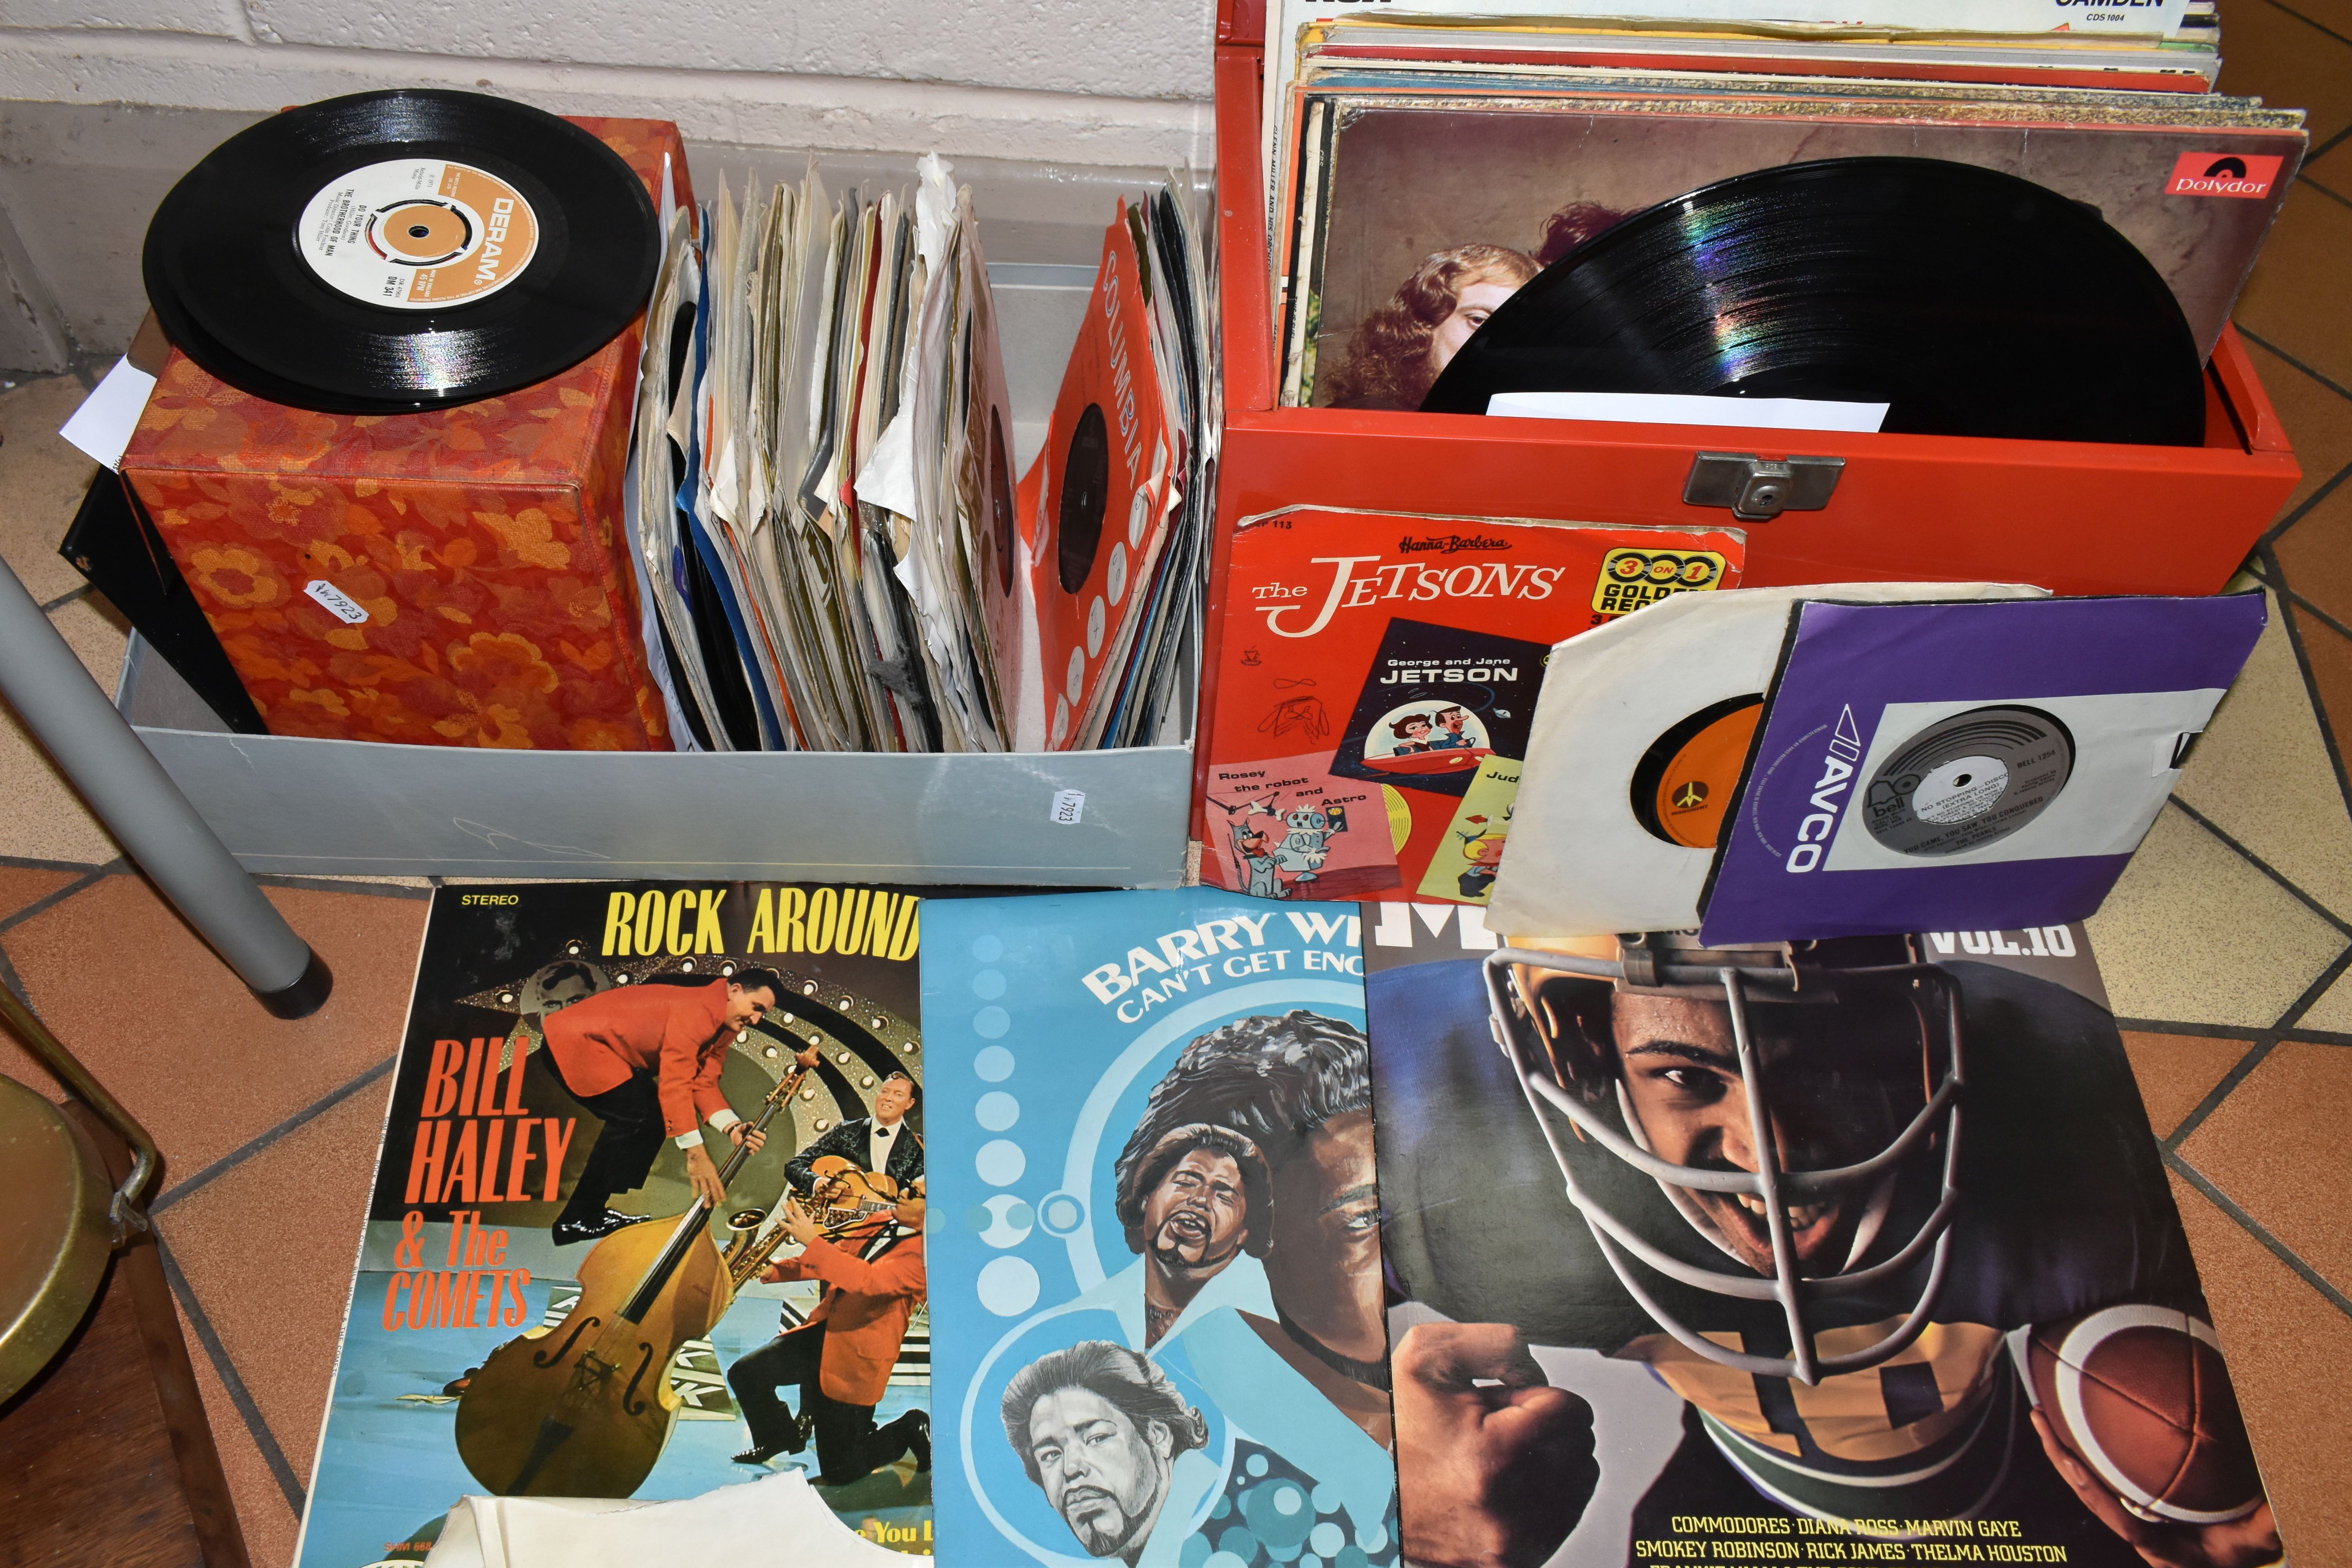 ONE BOX OF SINGLE 45RPM RECORDS AND A CASE OF L.P RECORDS, approximately seventy singles, artists